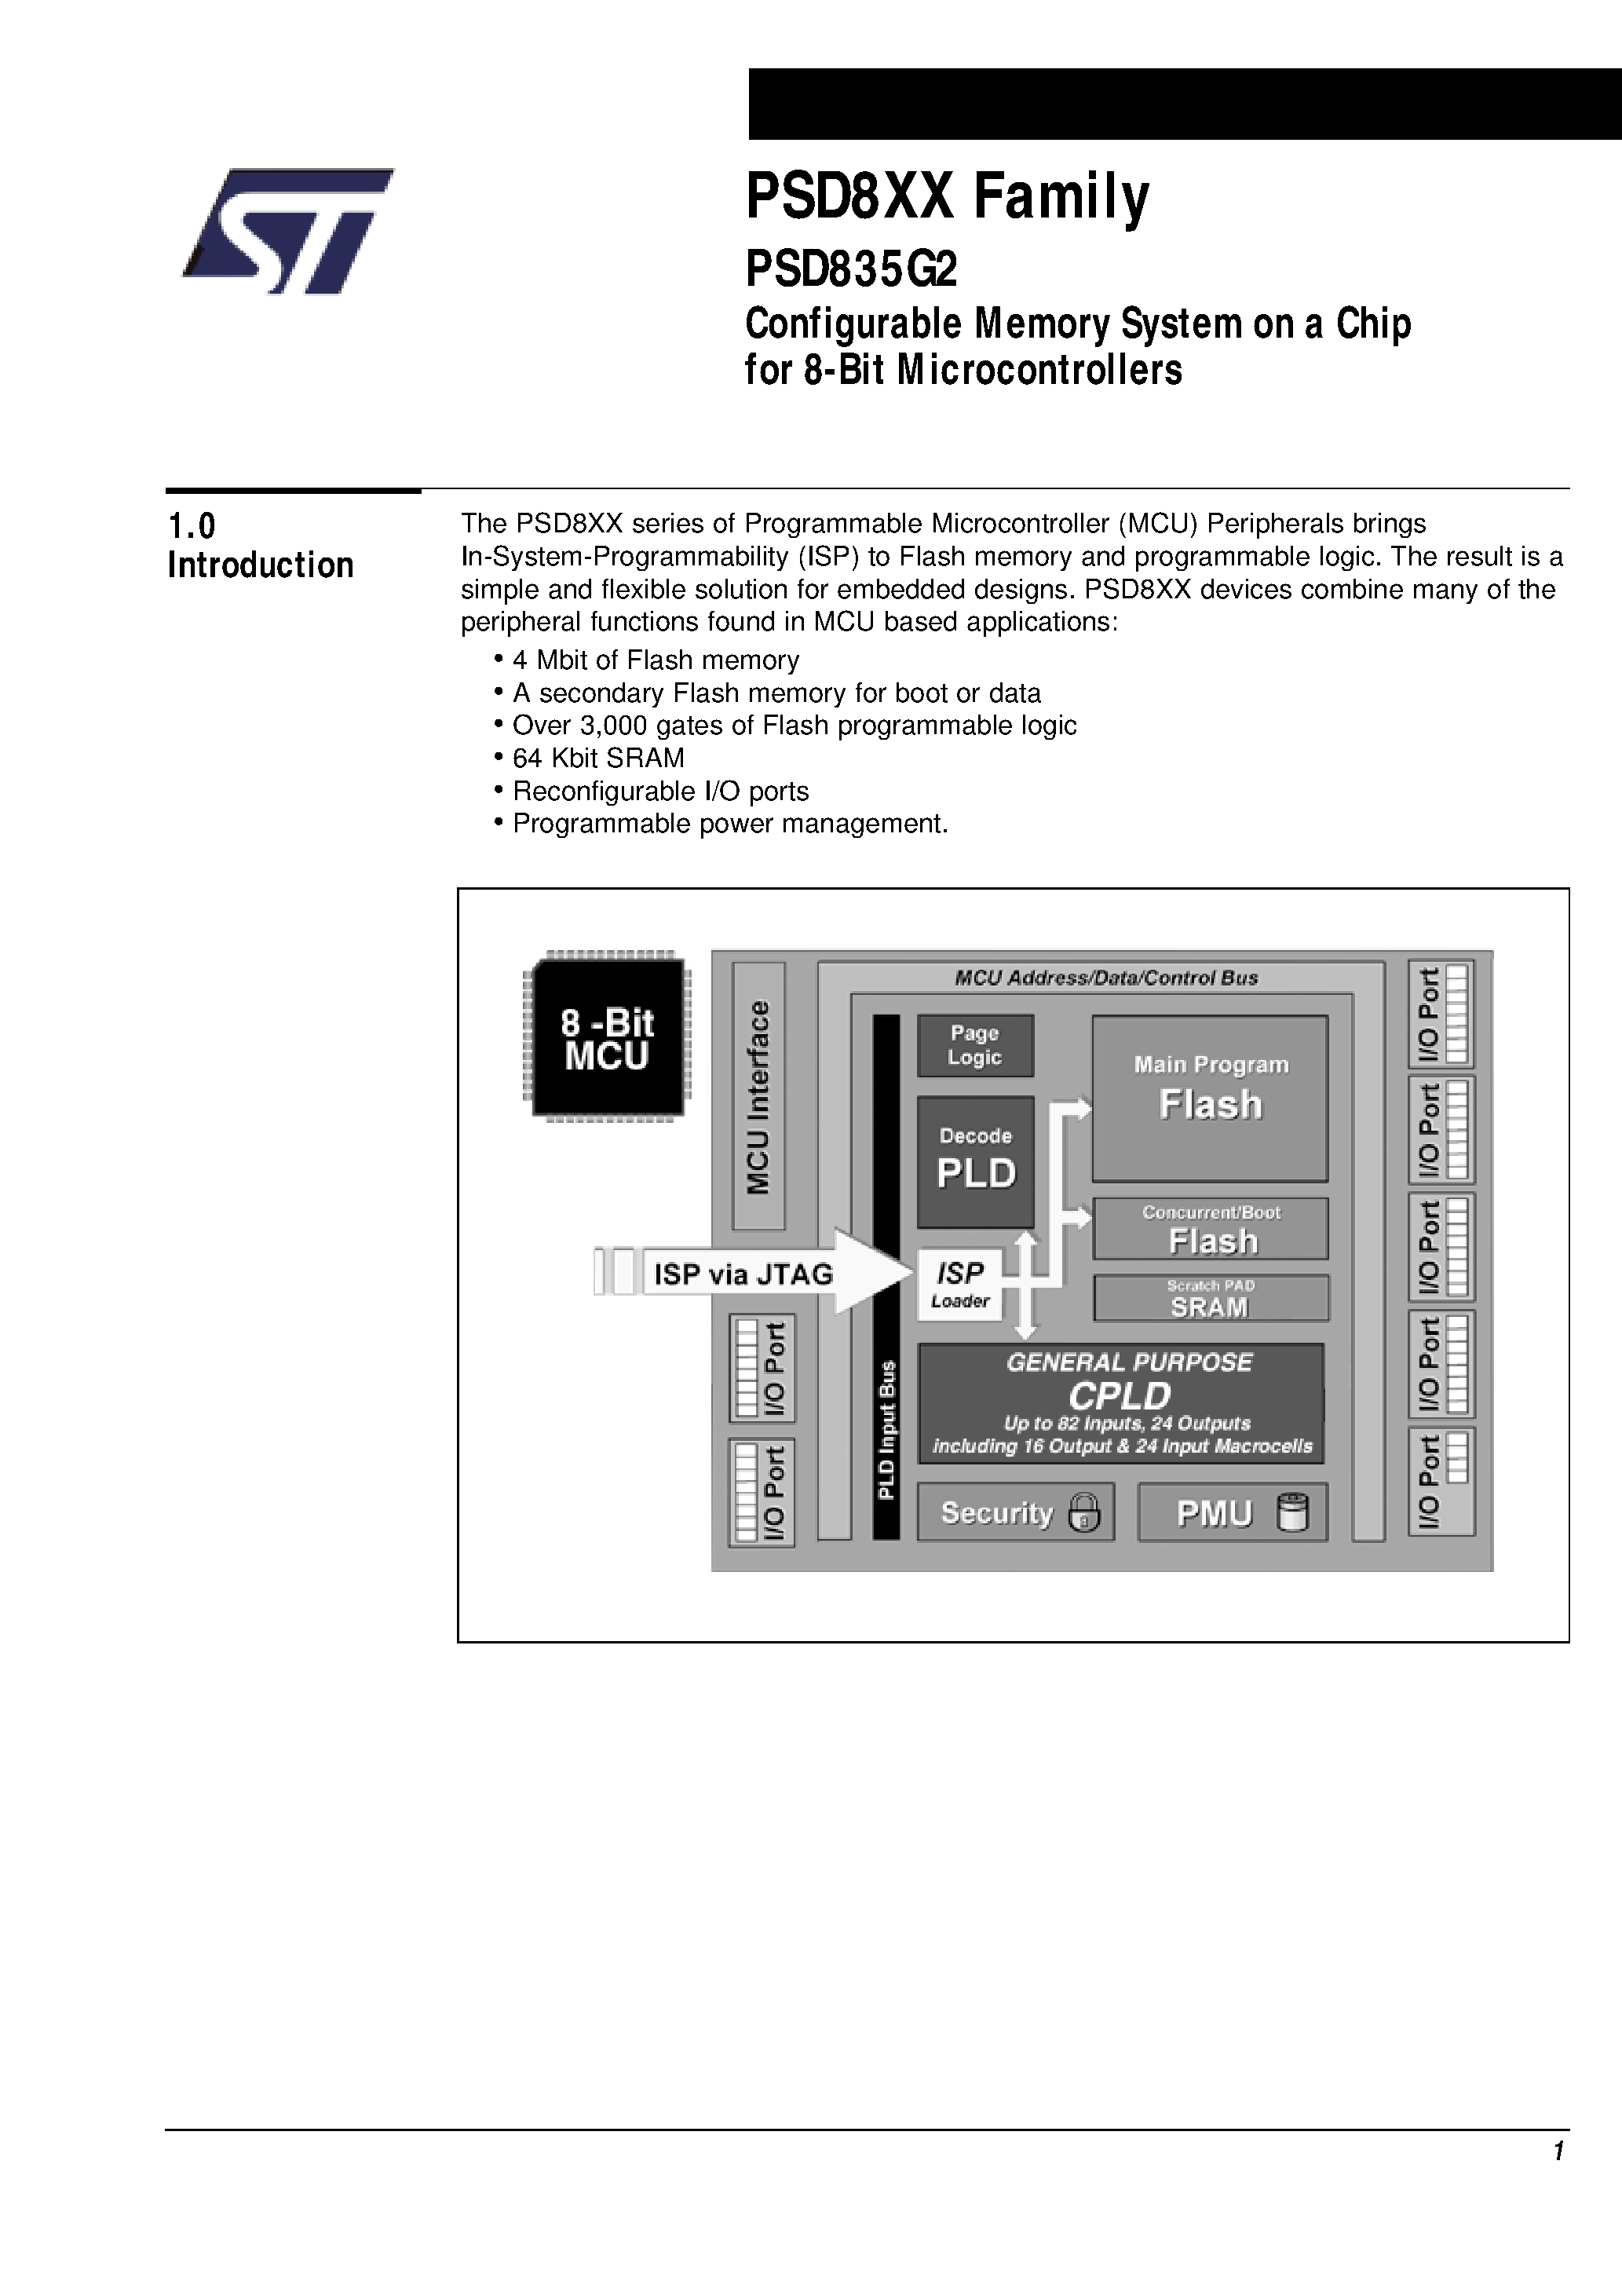 Datasheet PSD835F1-A-12U - Configurable Memory System on a Chip for 8-Bit Microcontrollers page 2